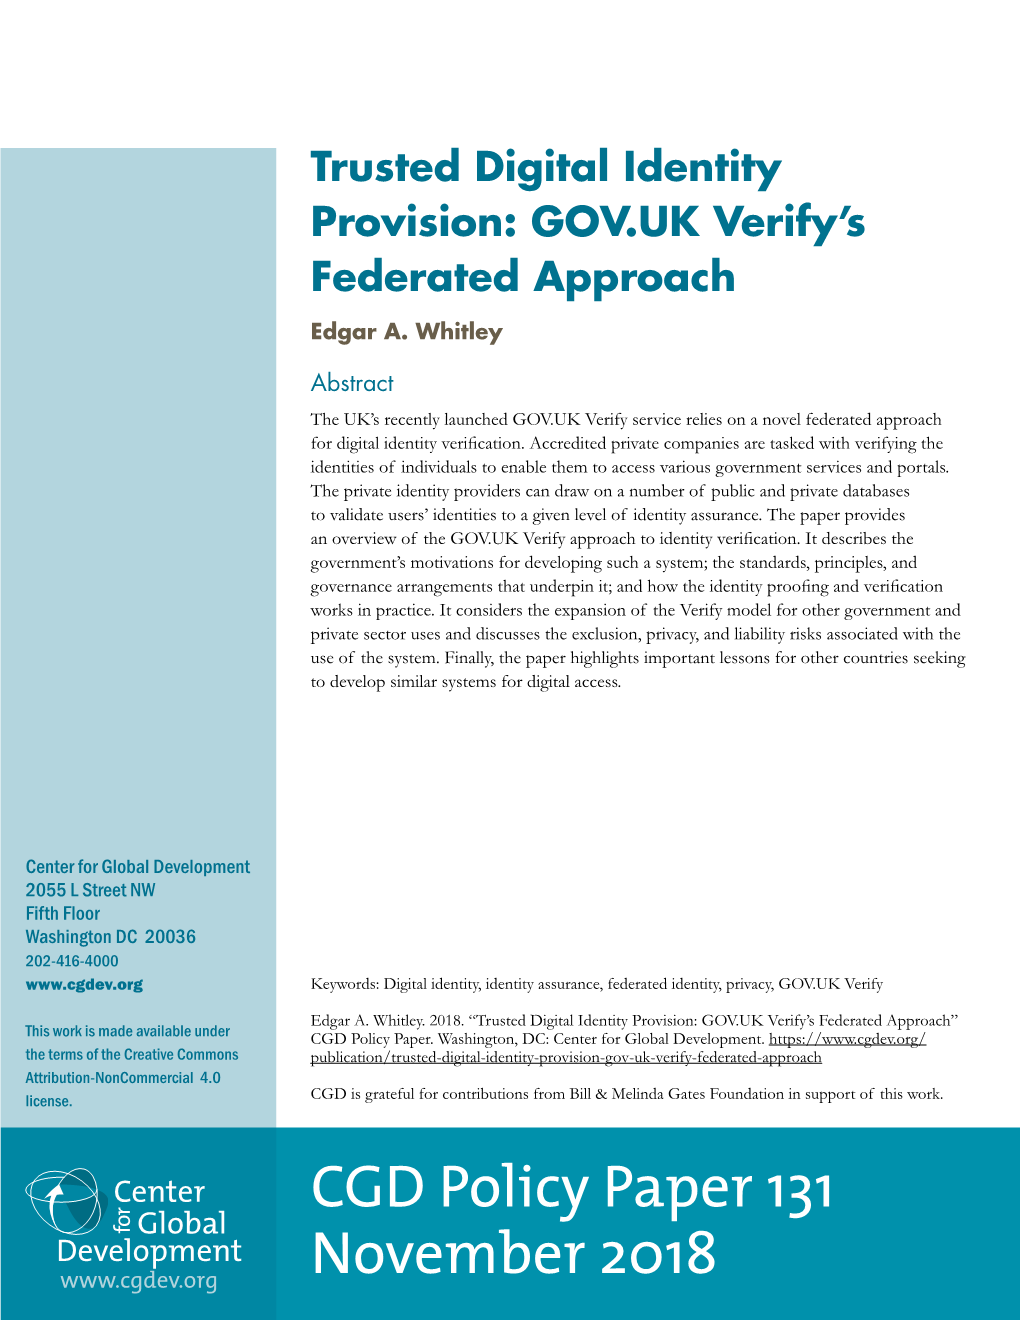 Trusted Digital Identity Provision: GOV.UK Verify’S Federated Approach